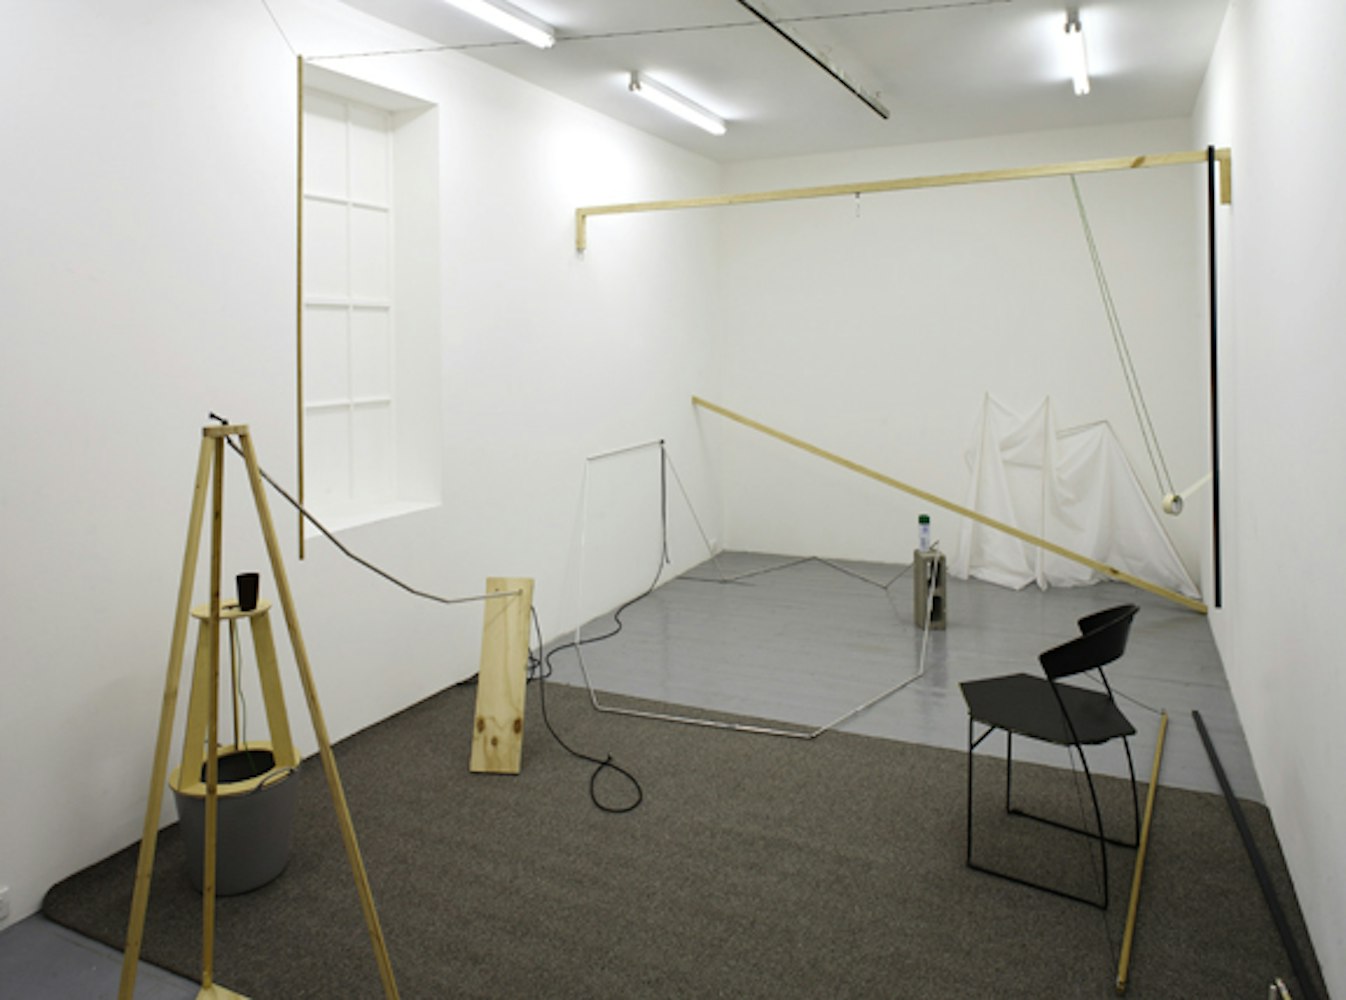 Installation view of Bianca Hester, 'Provisional Devices for the Production of a Propositional Living Space' at Studio 12 